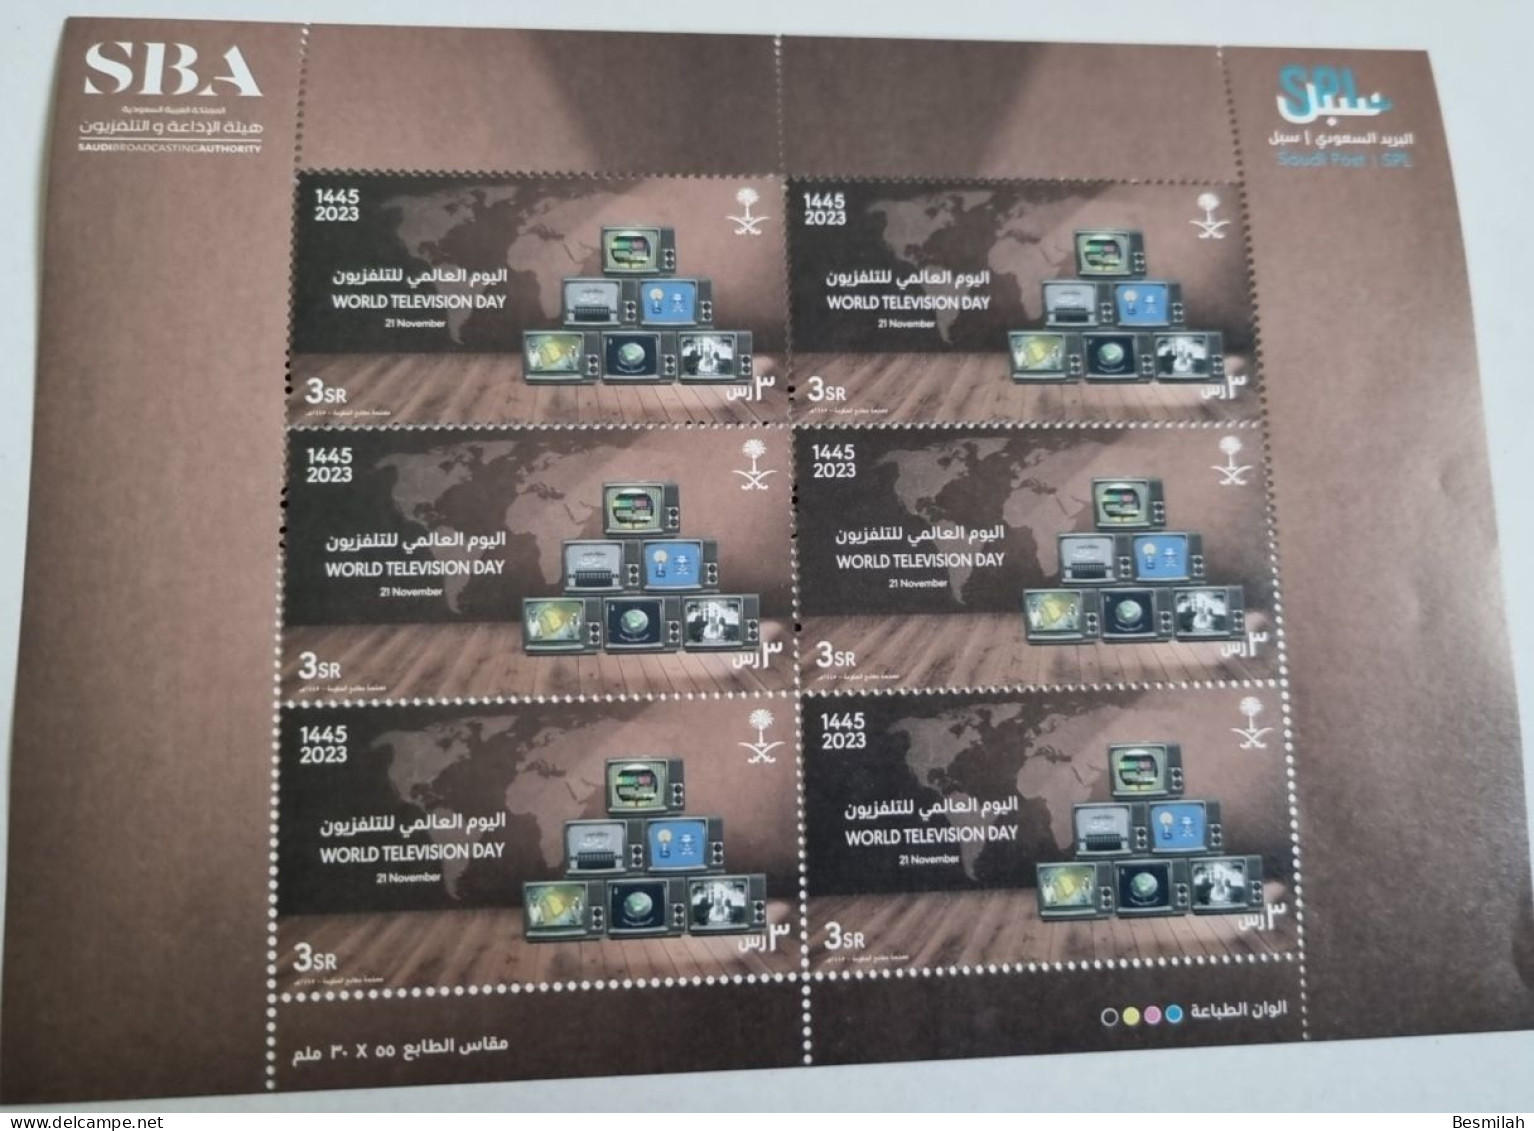 Saudi Arabia Stamp World Television Day 2023 (1445 Hijry) 7 Pieces Of 3 Riyals + First Day Version Cover - Arabie Saoudite